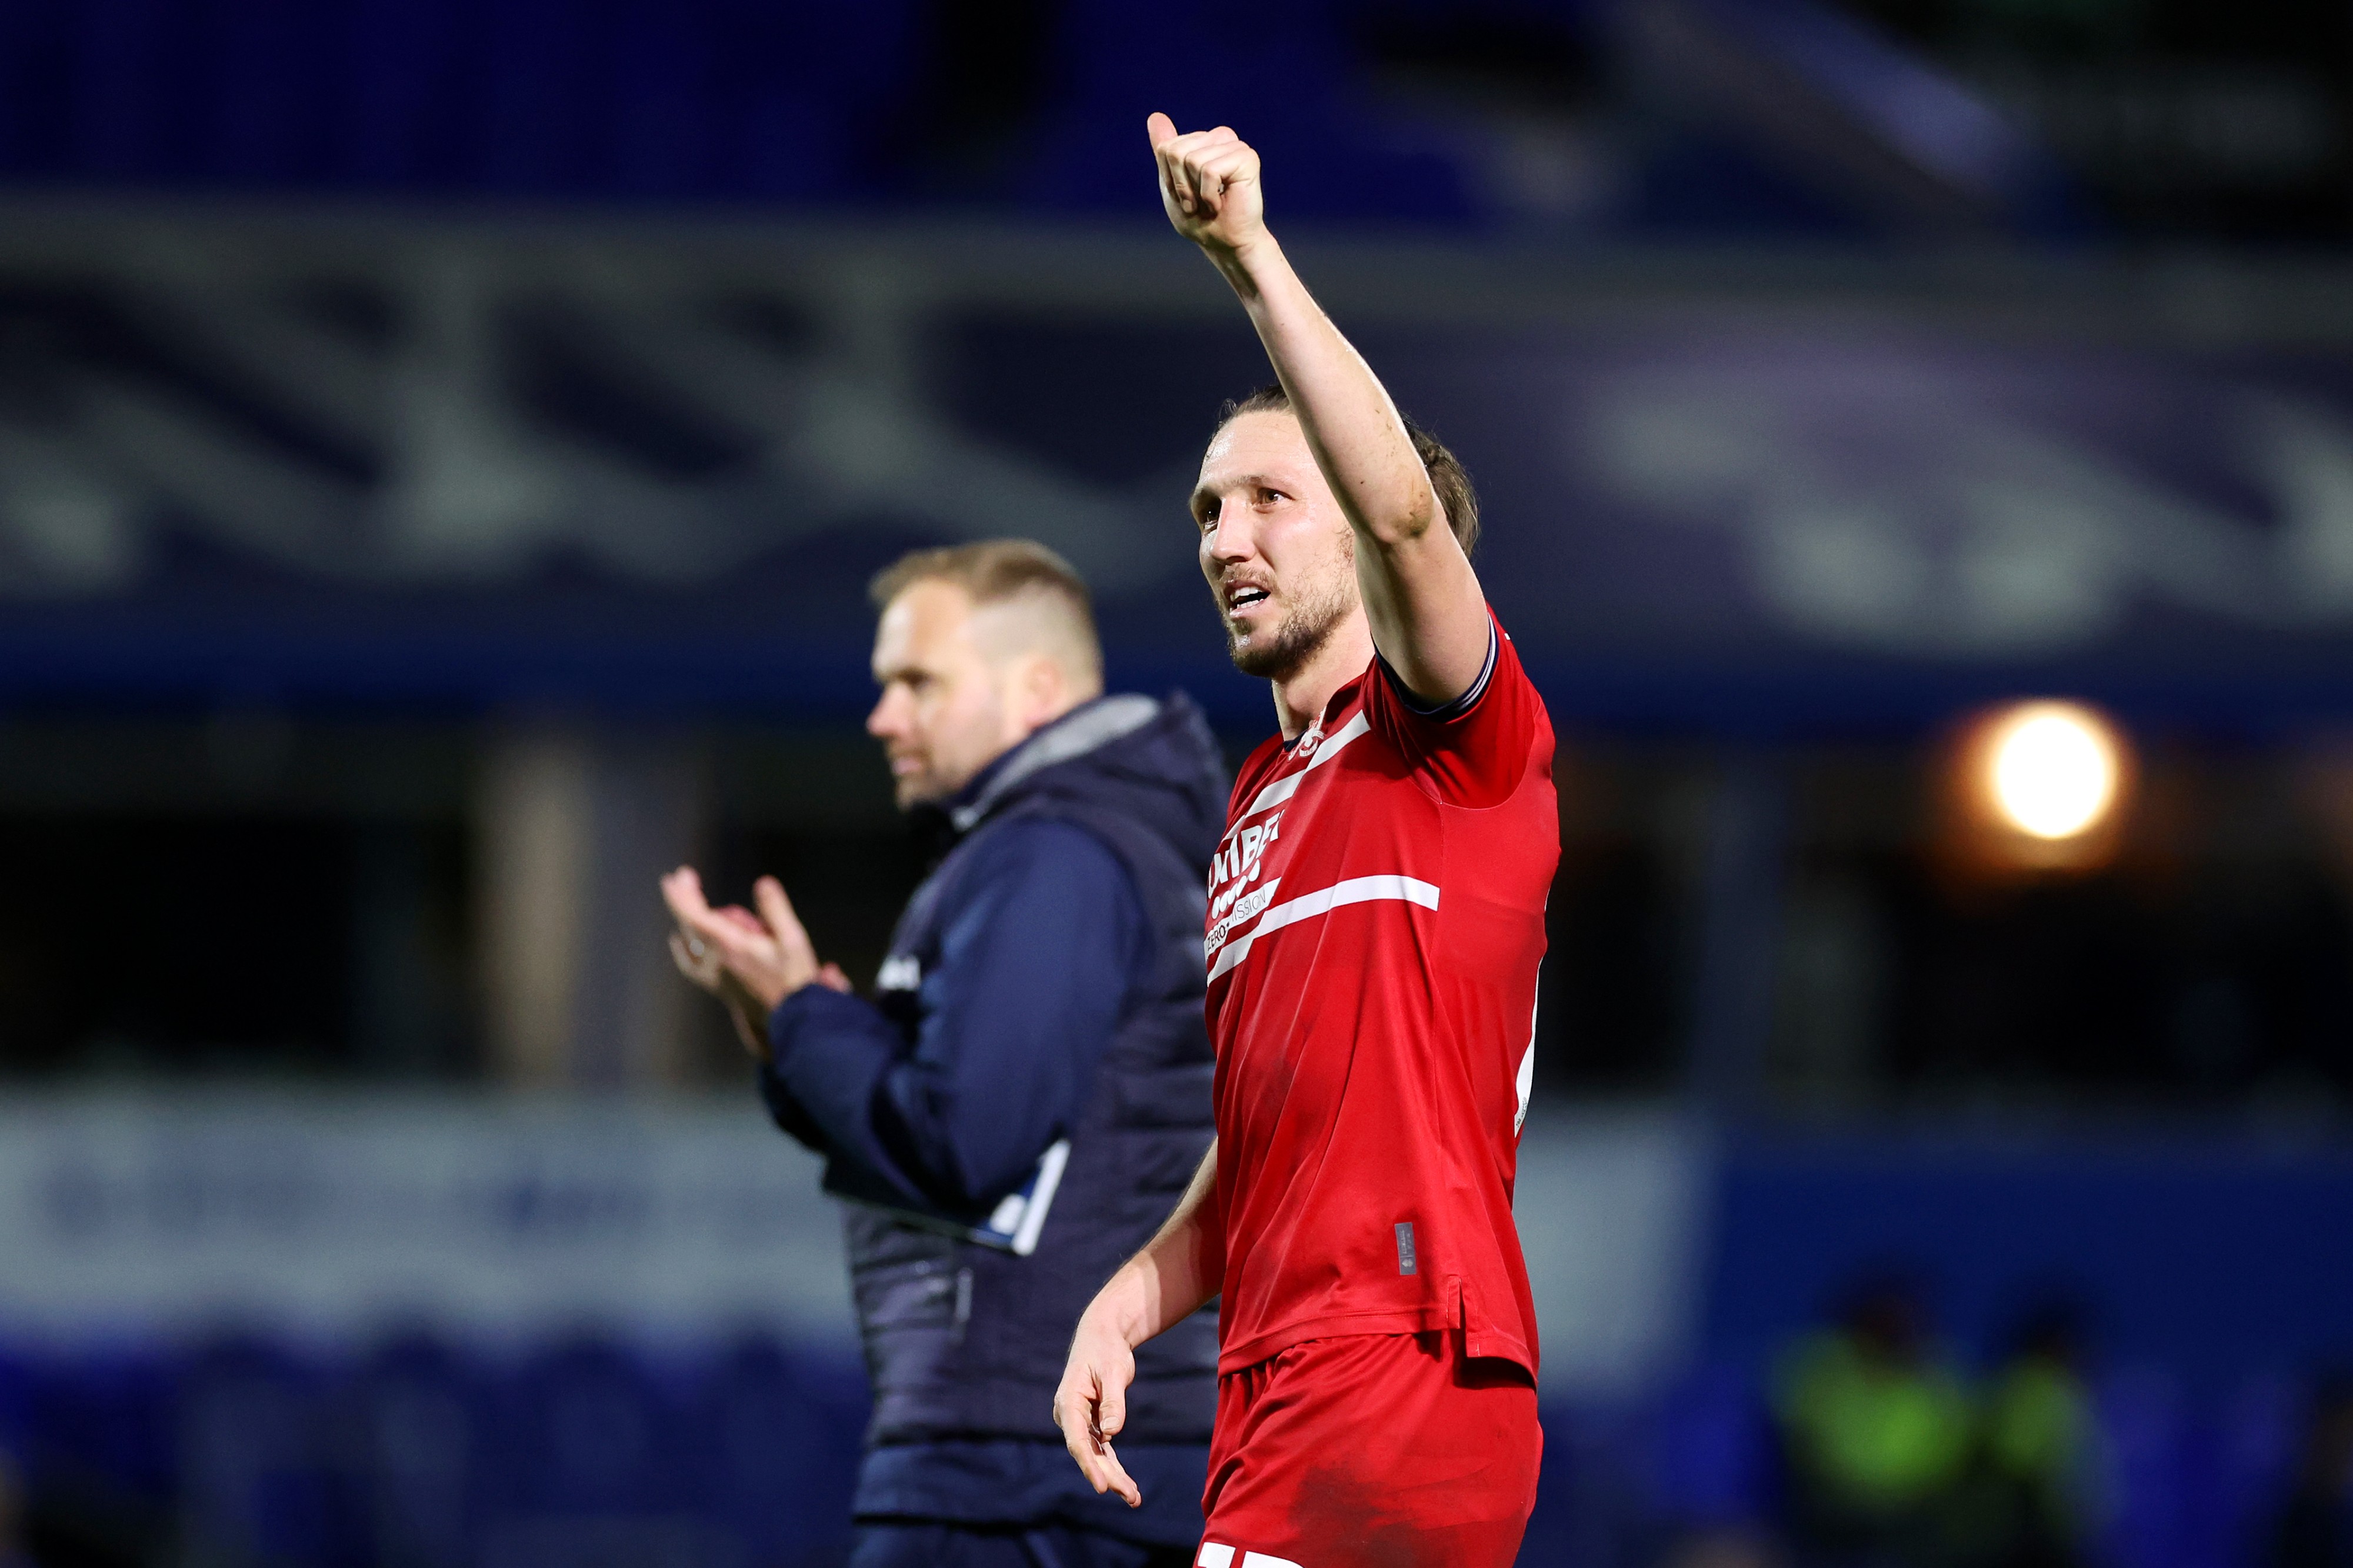 Leeds ace Luke Ayling is playing for a permanent contract at Middlesbrough